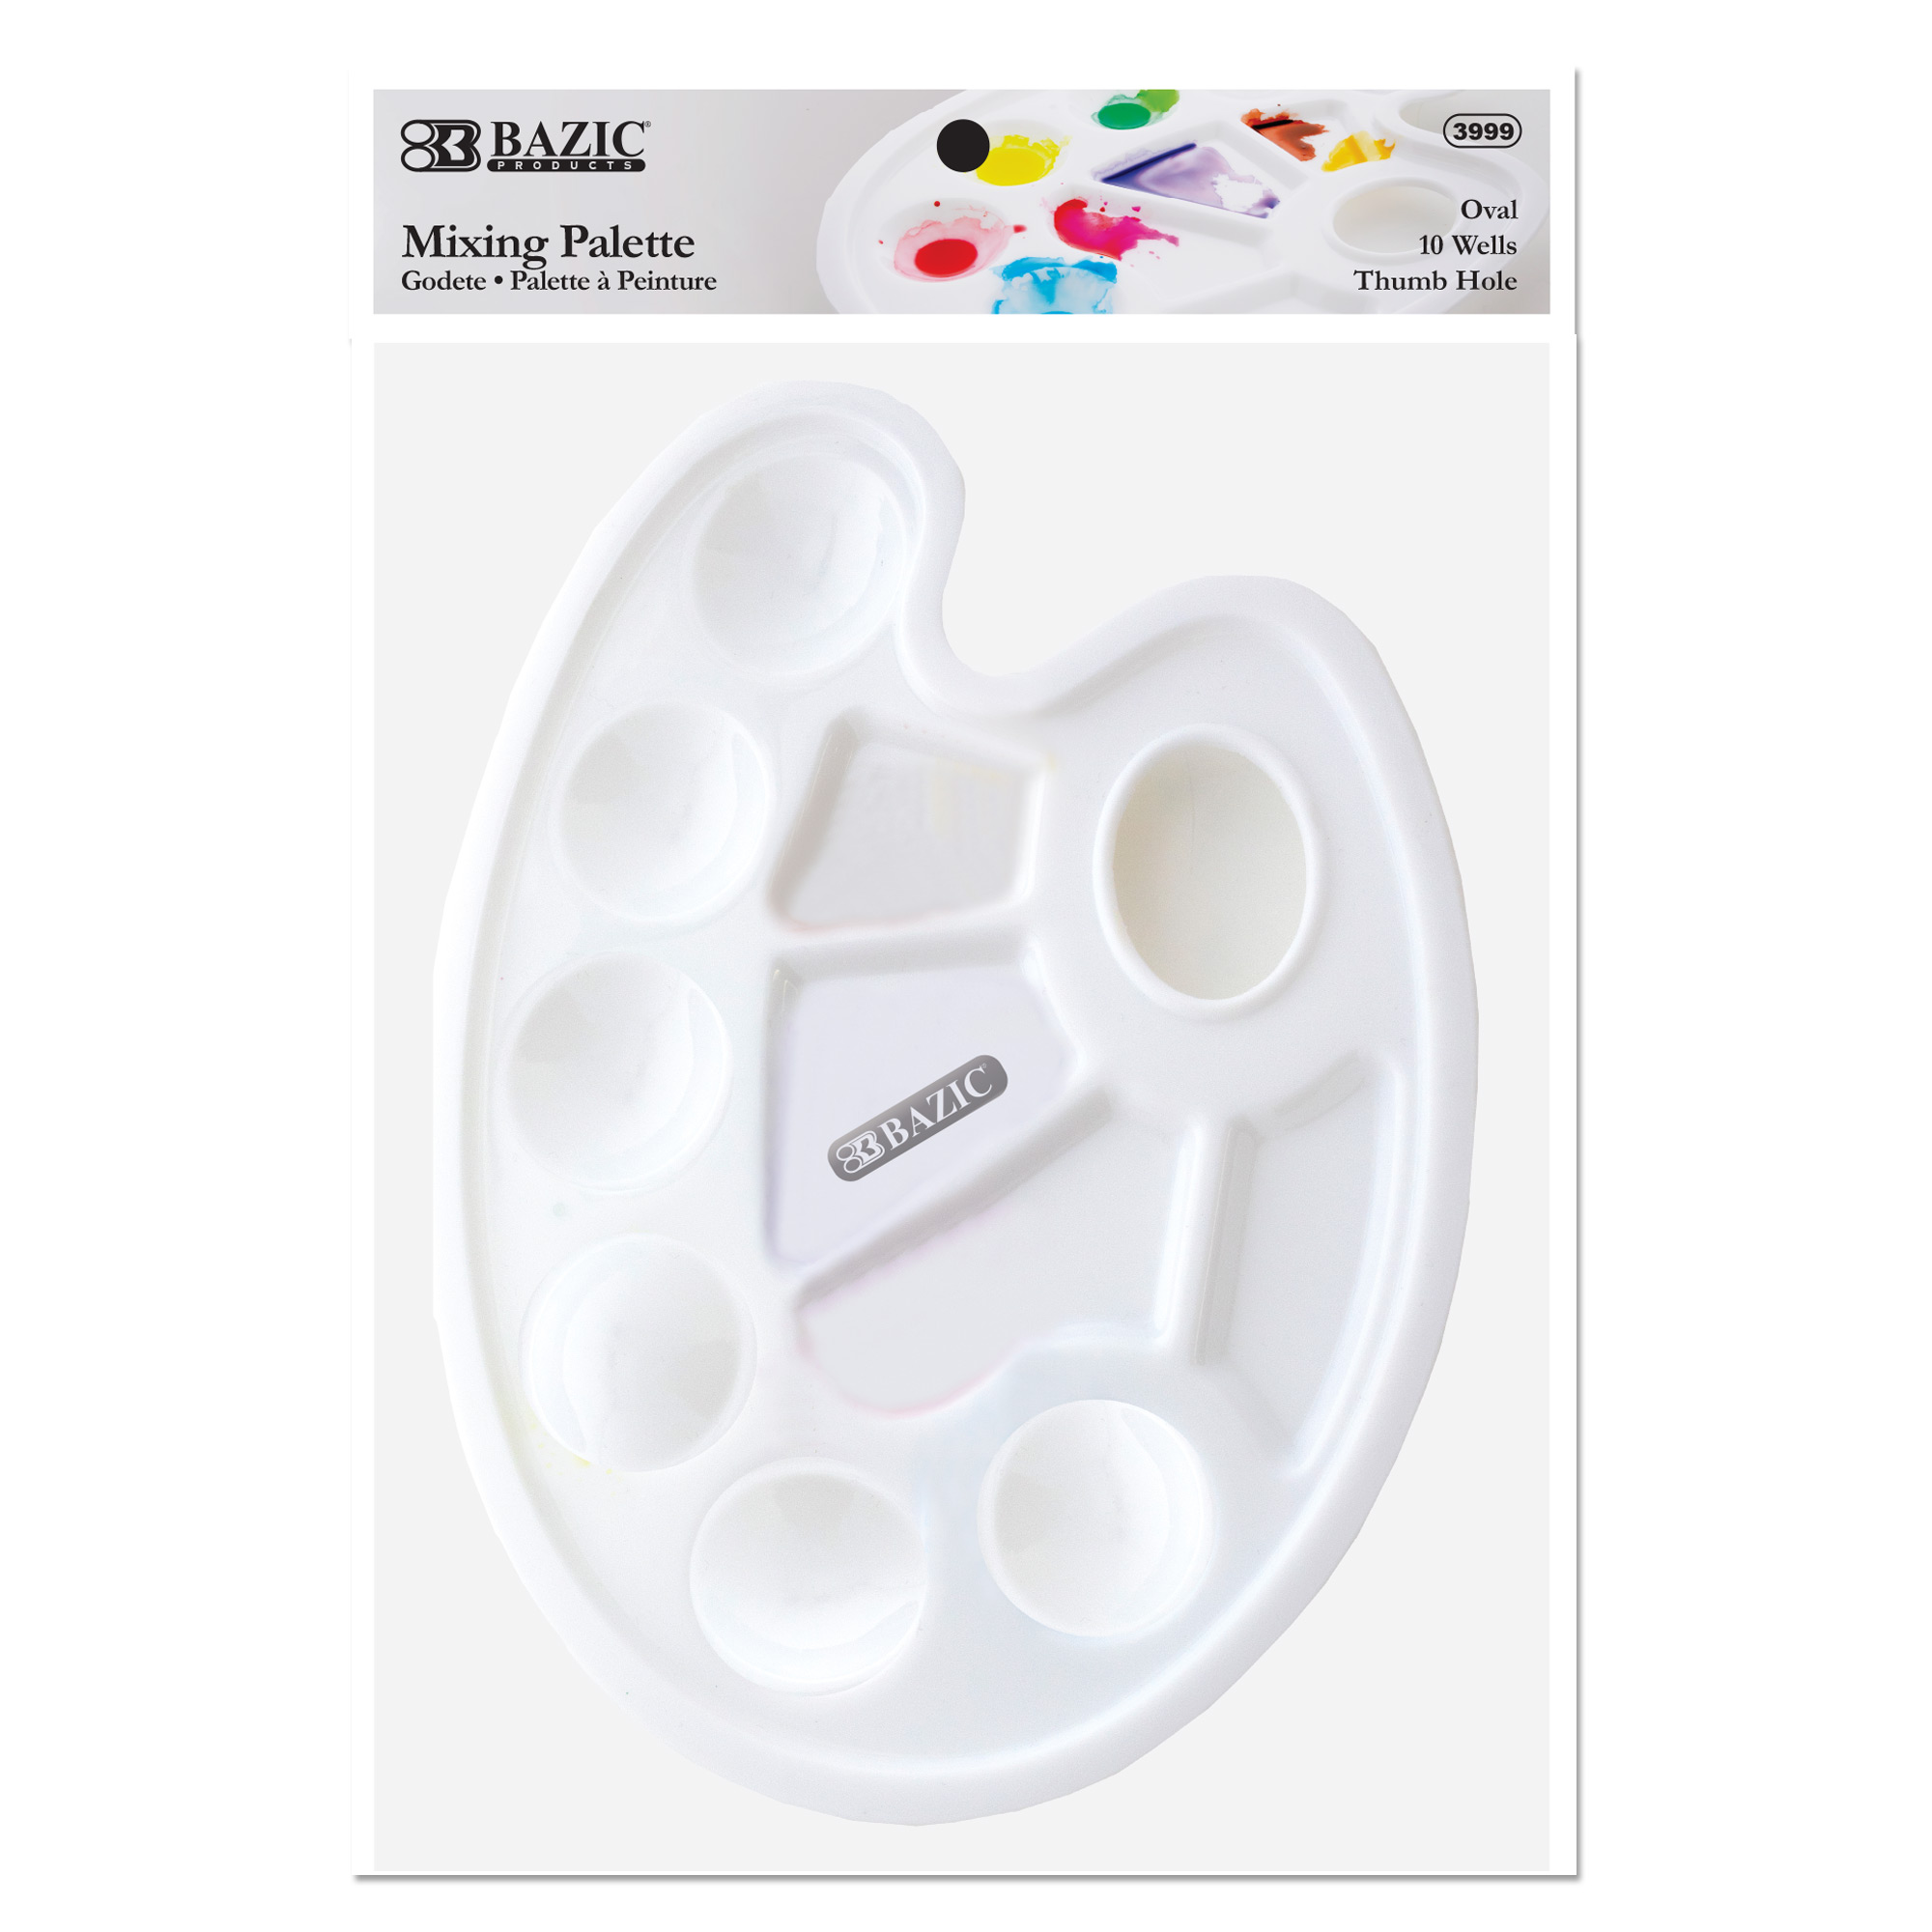 10-Well Plastic Artist Painting Palette, Paint Color Mixing Tray, Art  Student